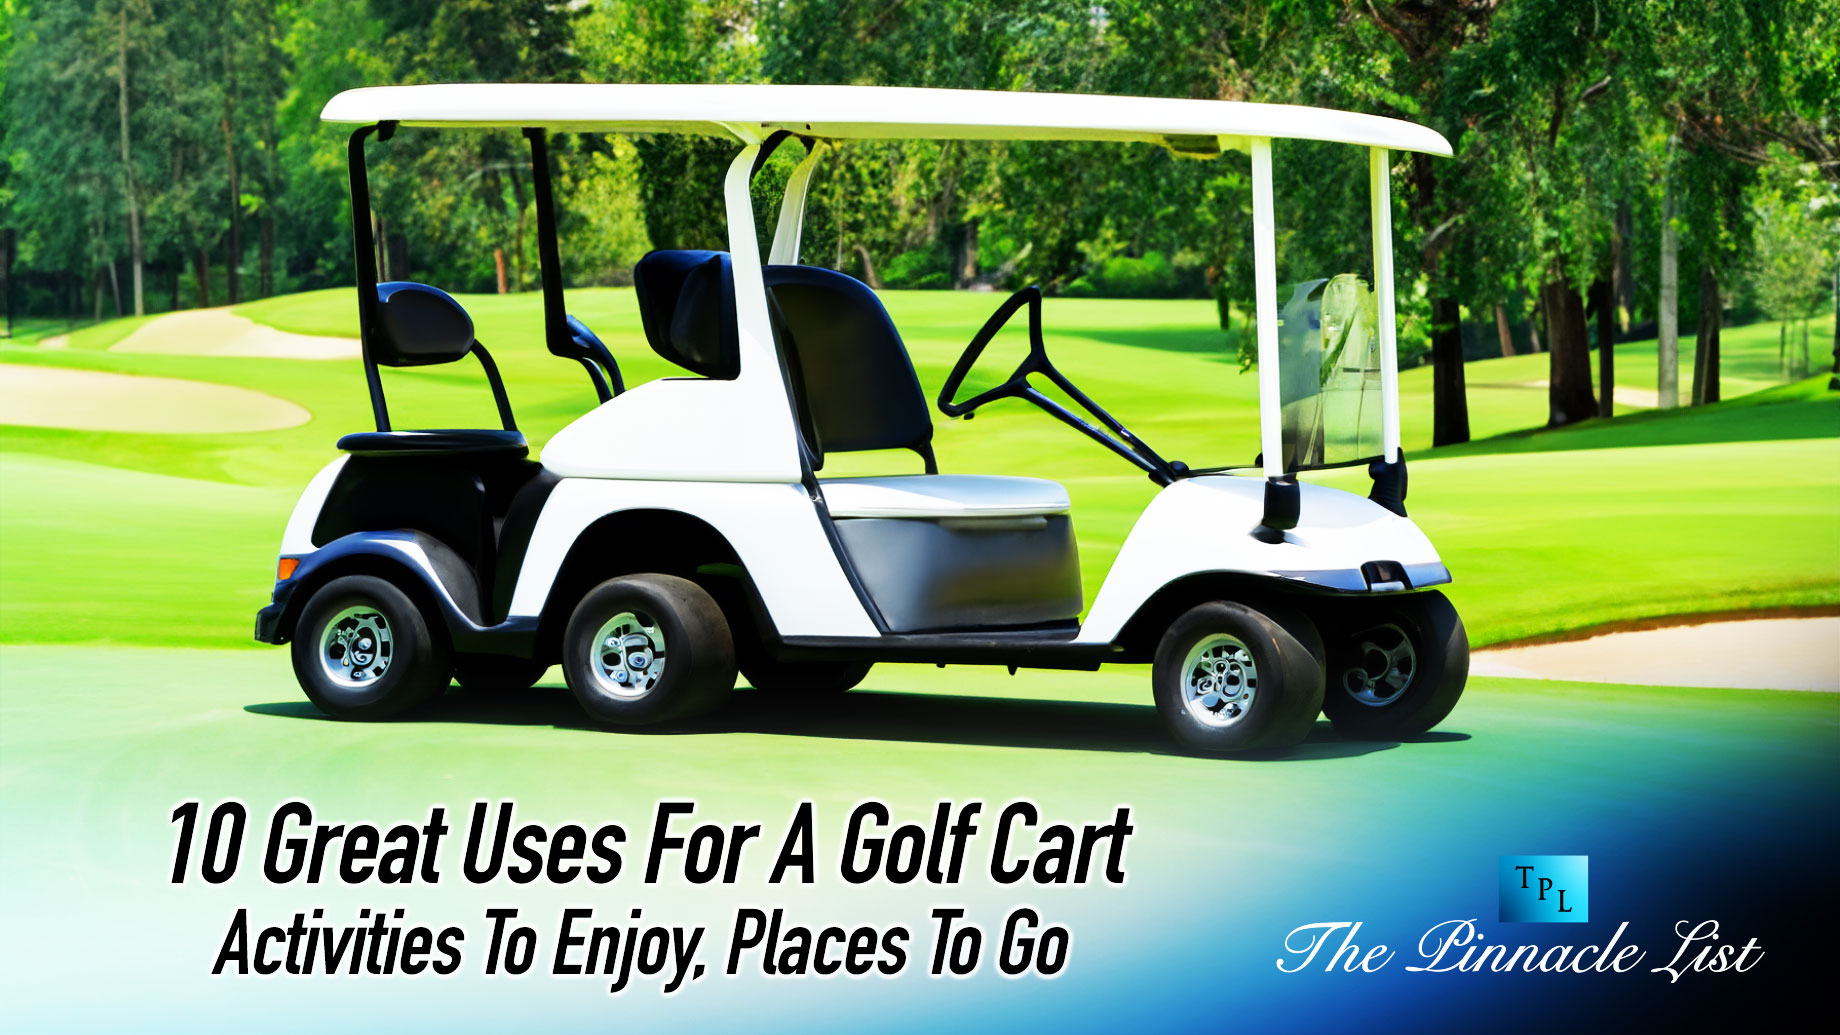 10 Great Uses For A Golf Cart: Activities To Enjoy, Places To Go